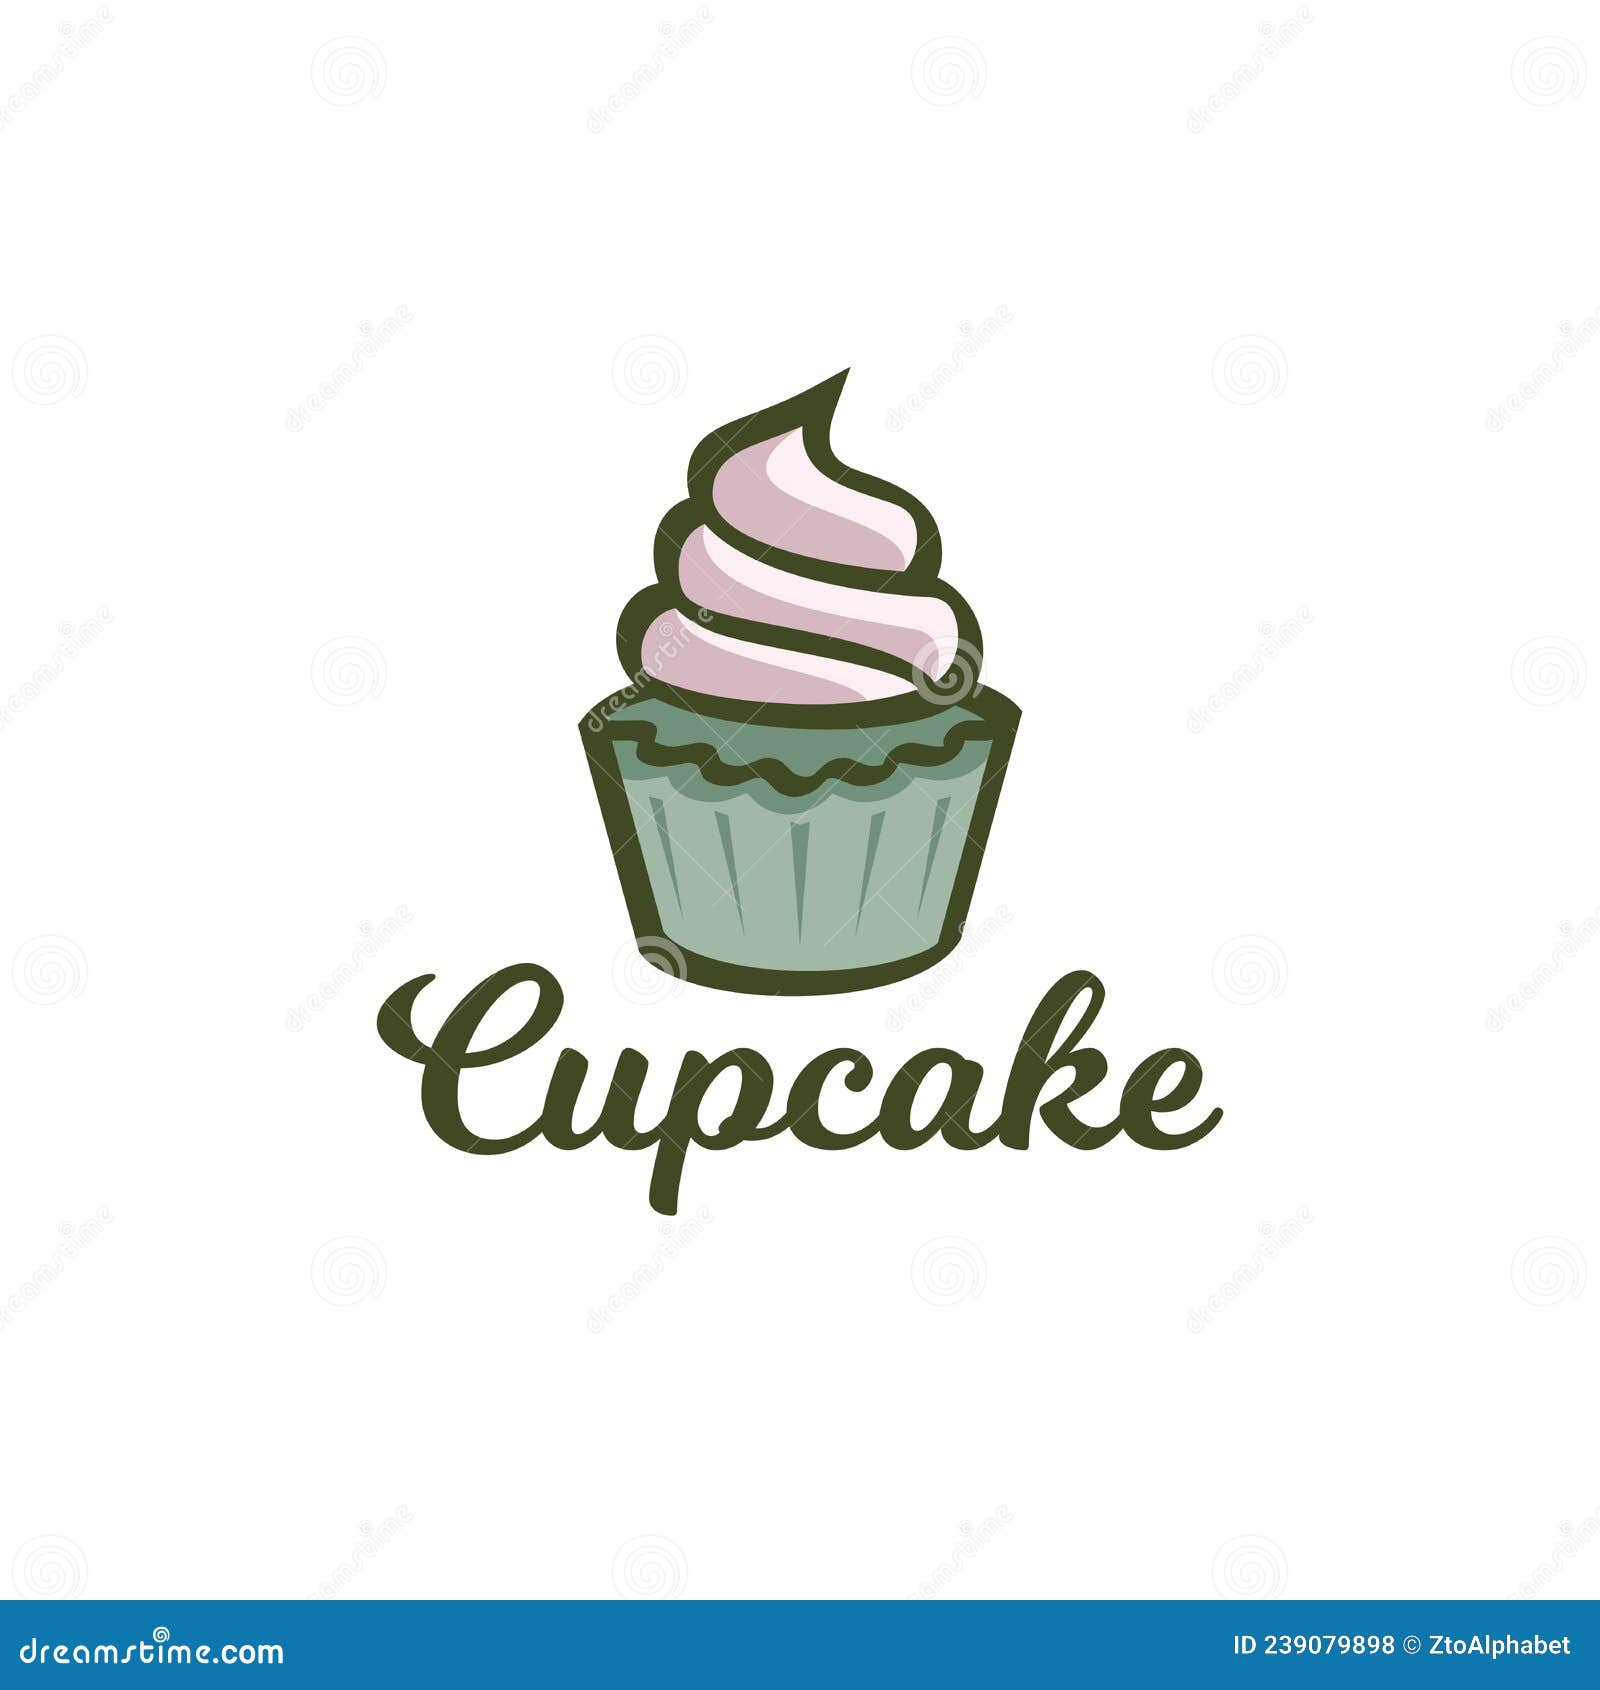 Cupcakes Logo Food Icon Bakery Cookie Stock Vector - Illustration of ...